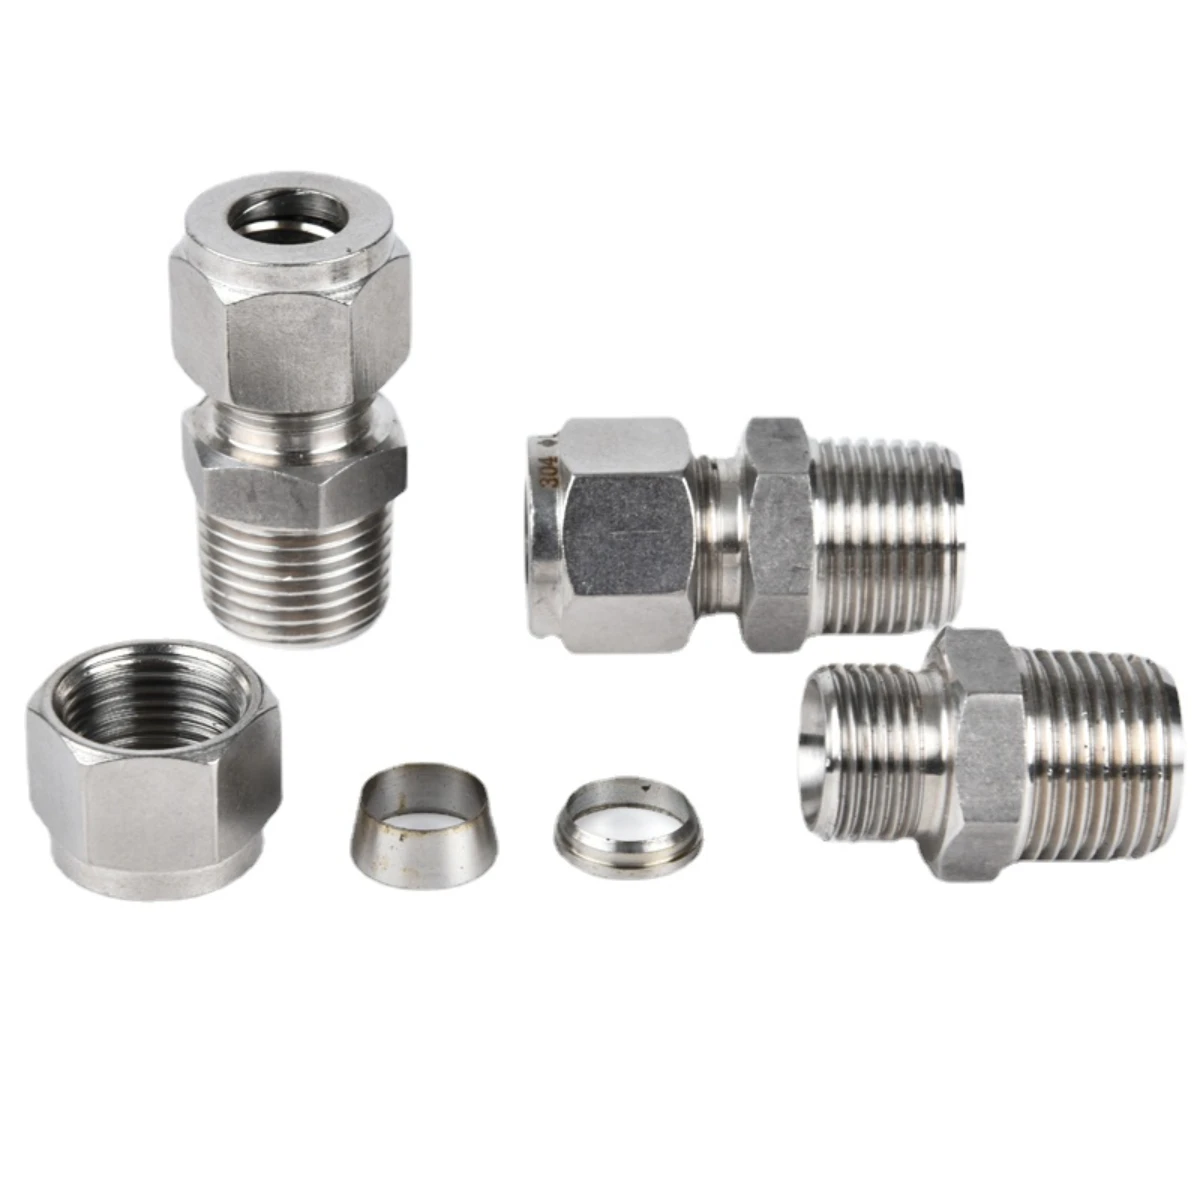 

1/8" 1/4" 3/8" 1/2" NPT Male x 3 4 6 8 10 12 14 16 18 20mm OD 316 Stianless Steel Pipe Fitting Compression Tube Union Connector